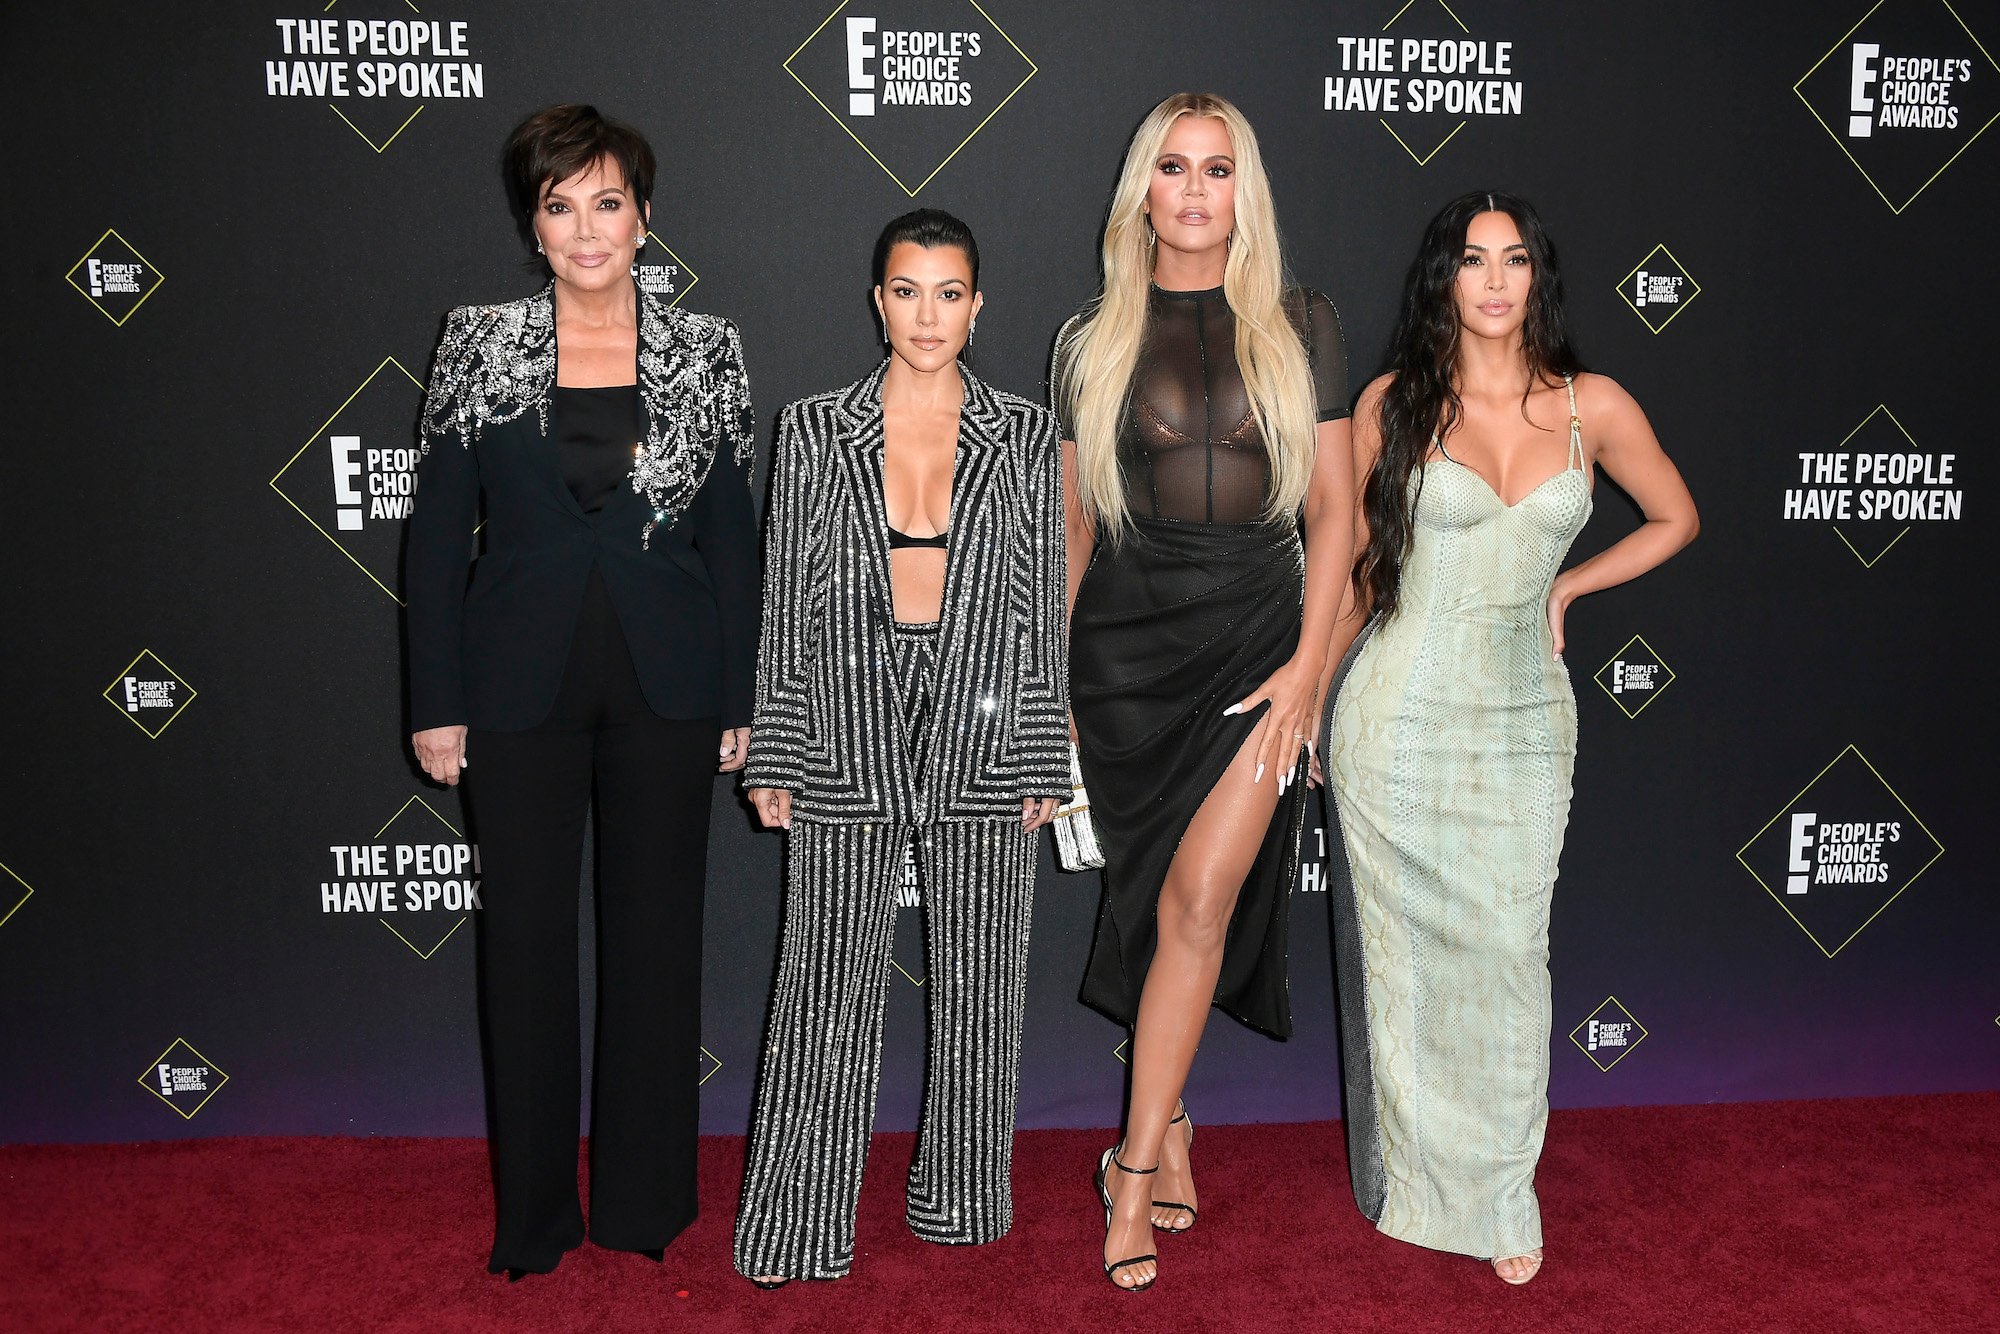 The Kardashian-Jenners attending the 2019 People's Choice Awards